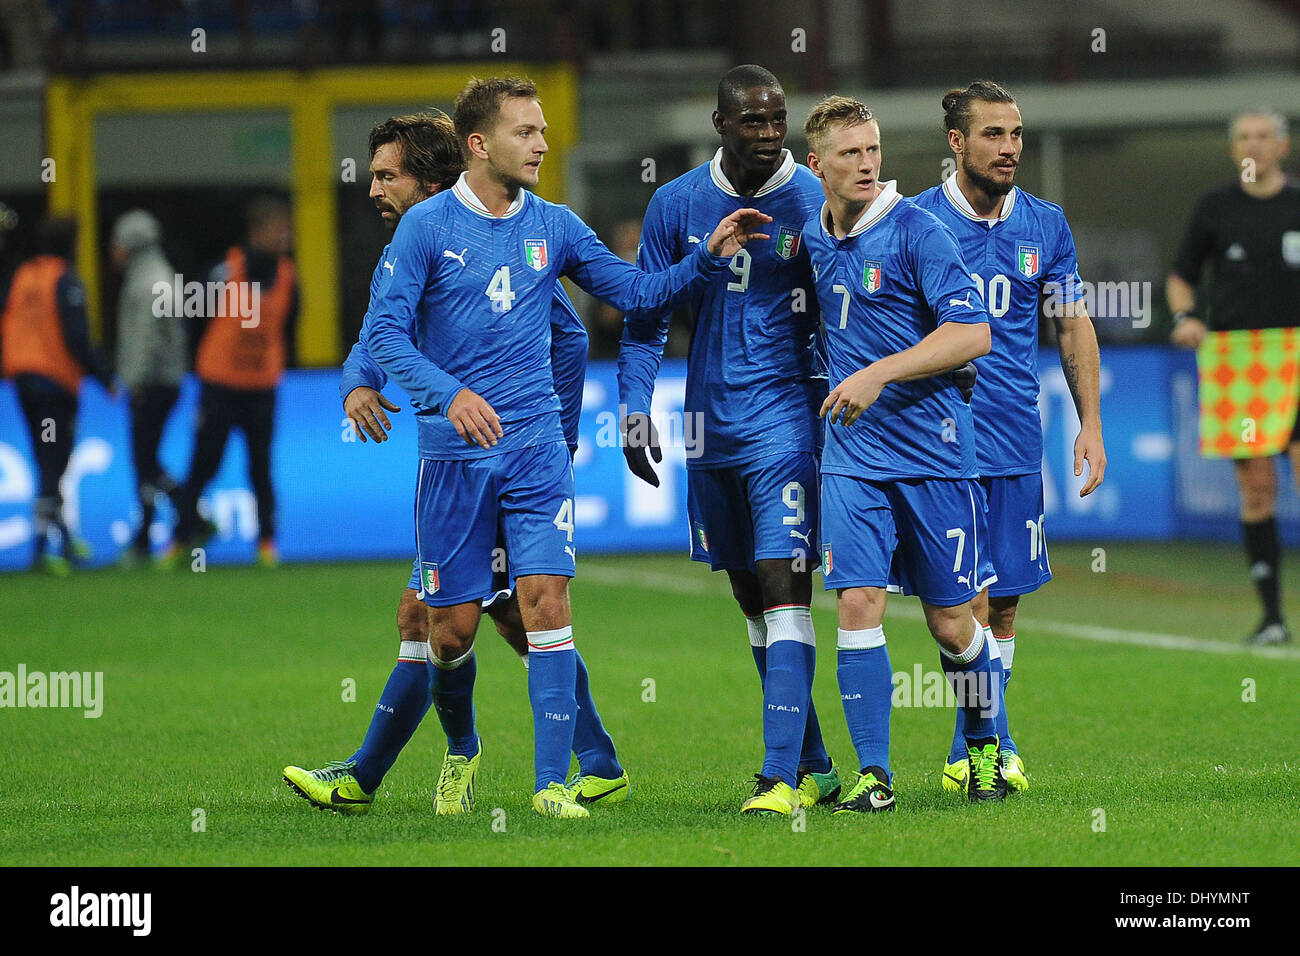 Milan, Italy. 15th Nov, 2013. Italy celebrates the 1-1 goal by Ignazio Abate during the friendly soccer match between Italy and Germany at Giuseppe Meazza Stadium (San Siro) in Milan, Italy, 15 November 2013. Photo: Revierfoto - NO WIRE SERVICE/dpa/Alamy Live News Stock Photo